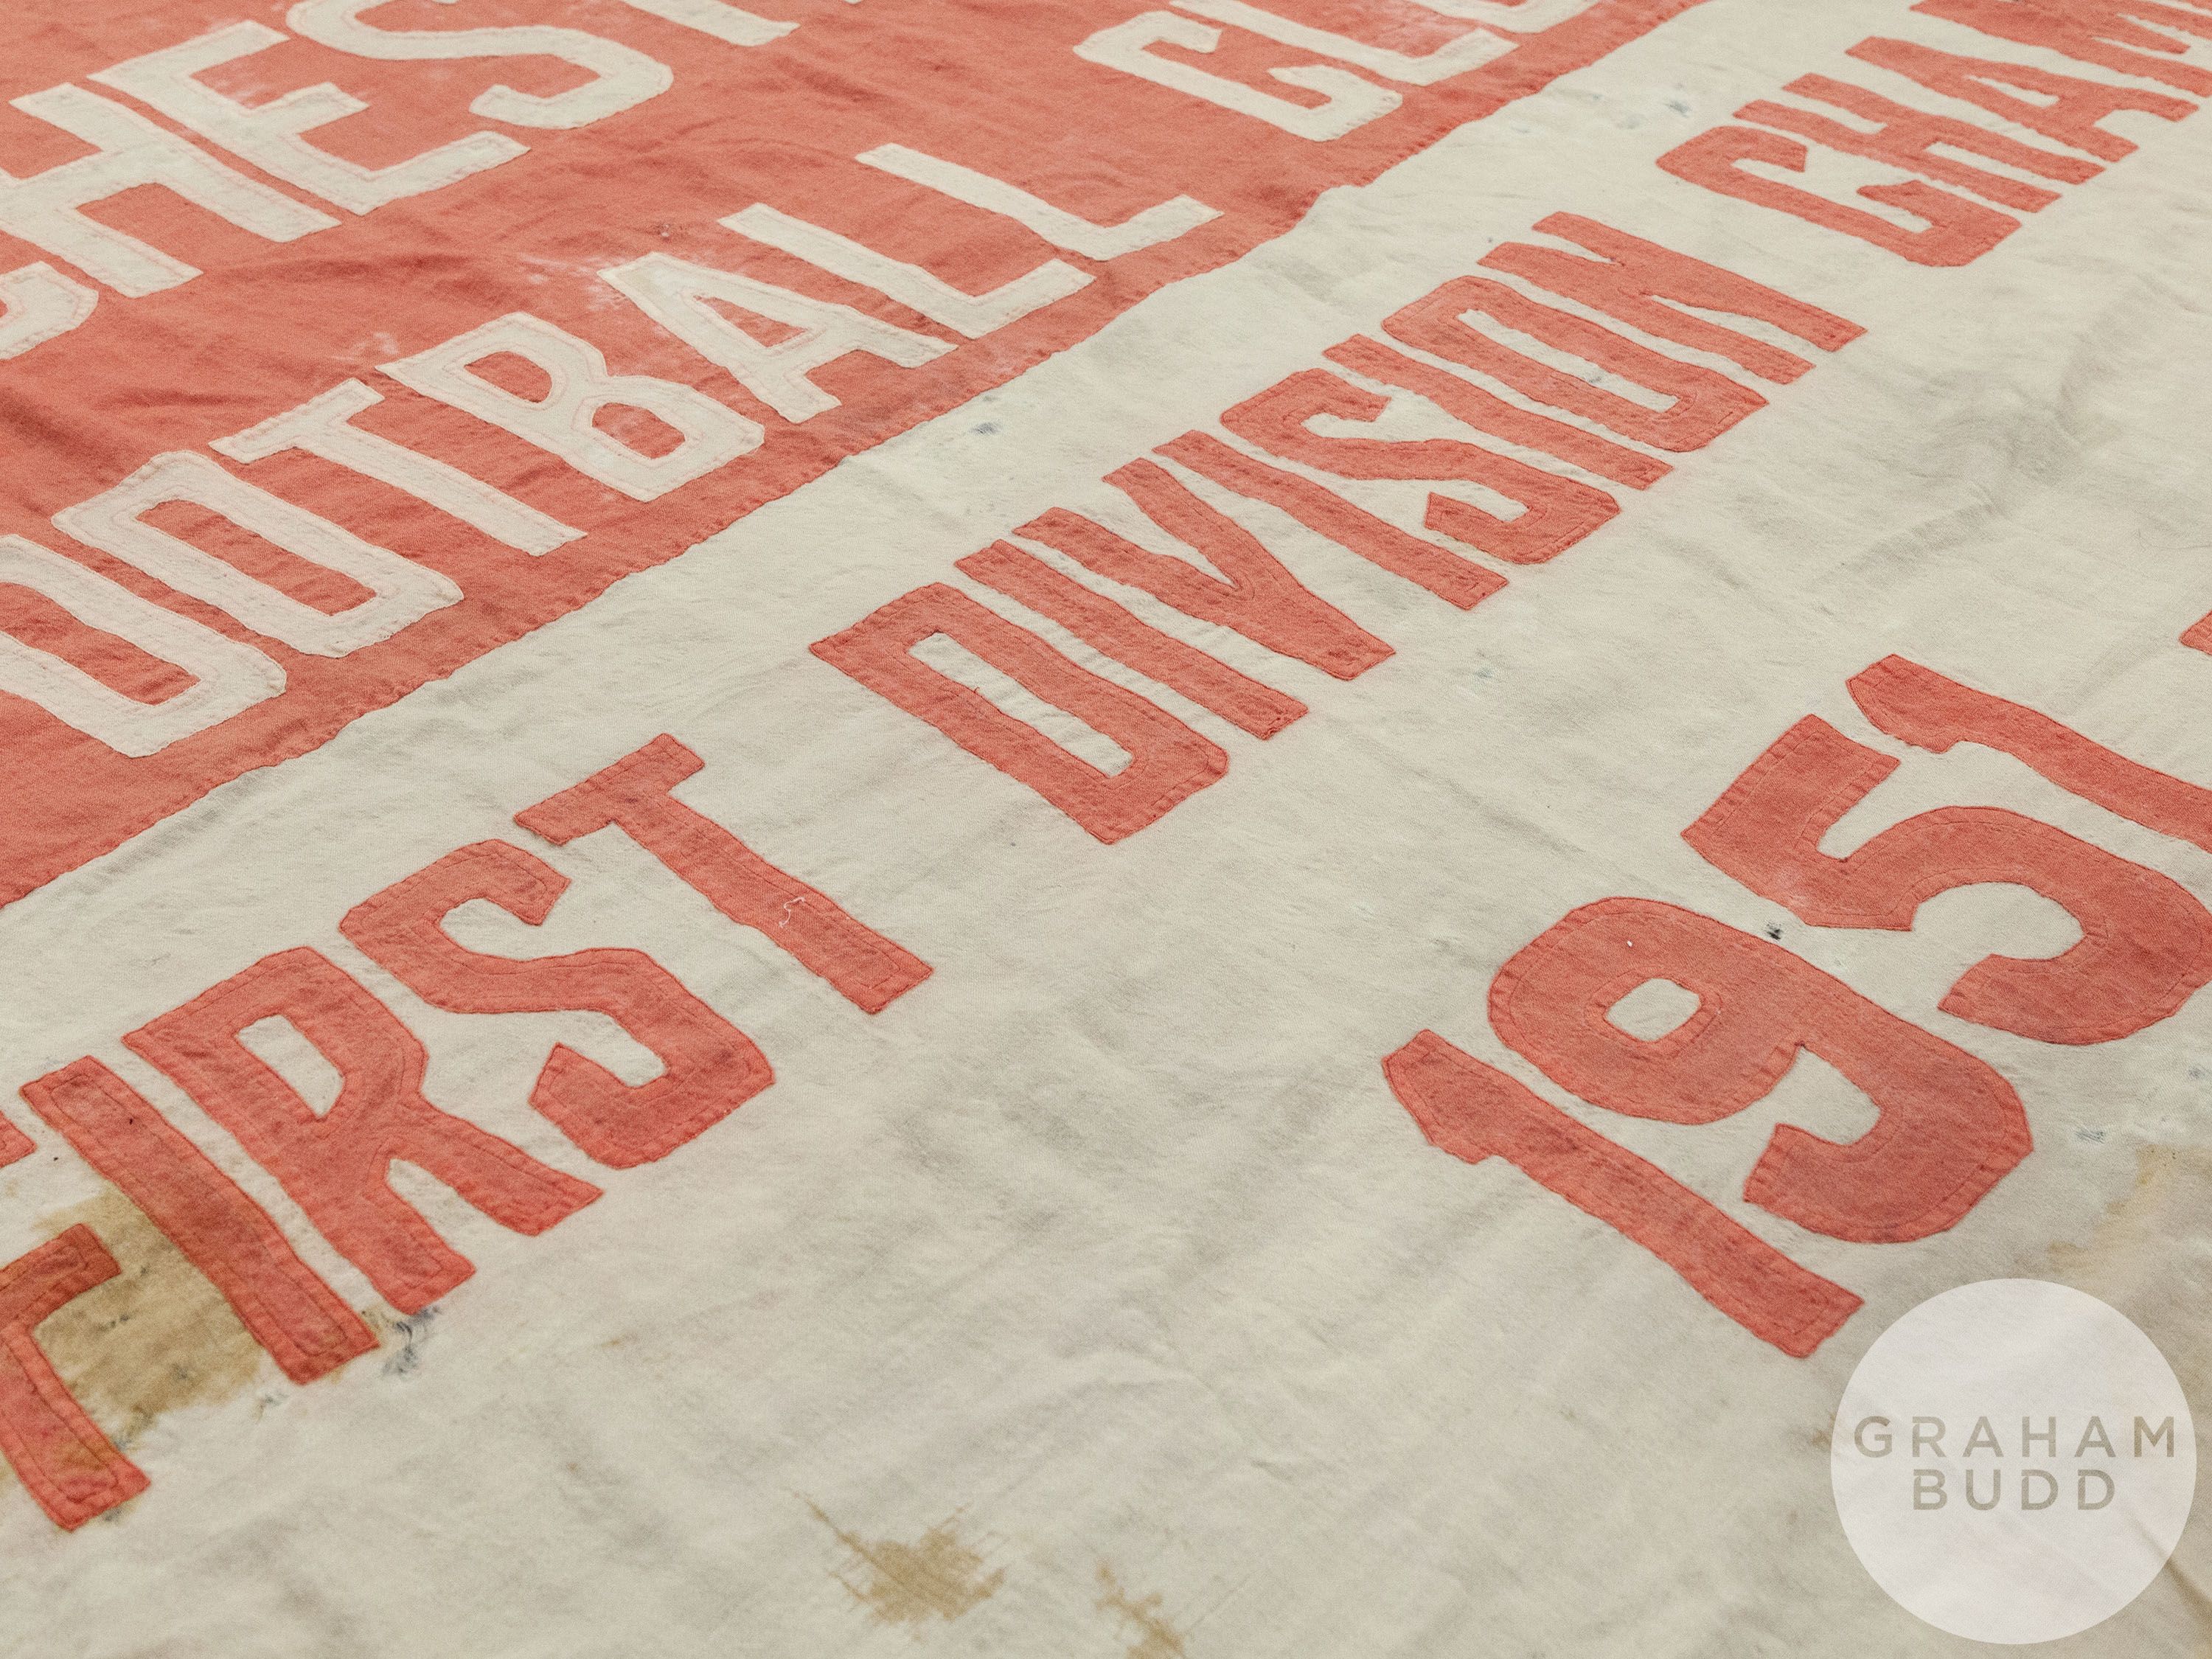 Manchester United large official red and white 1951-1952 First Division Champions flag - Image 3 of 3